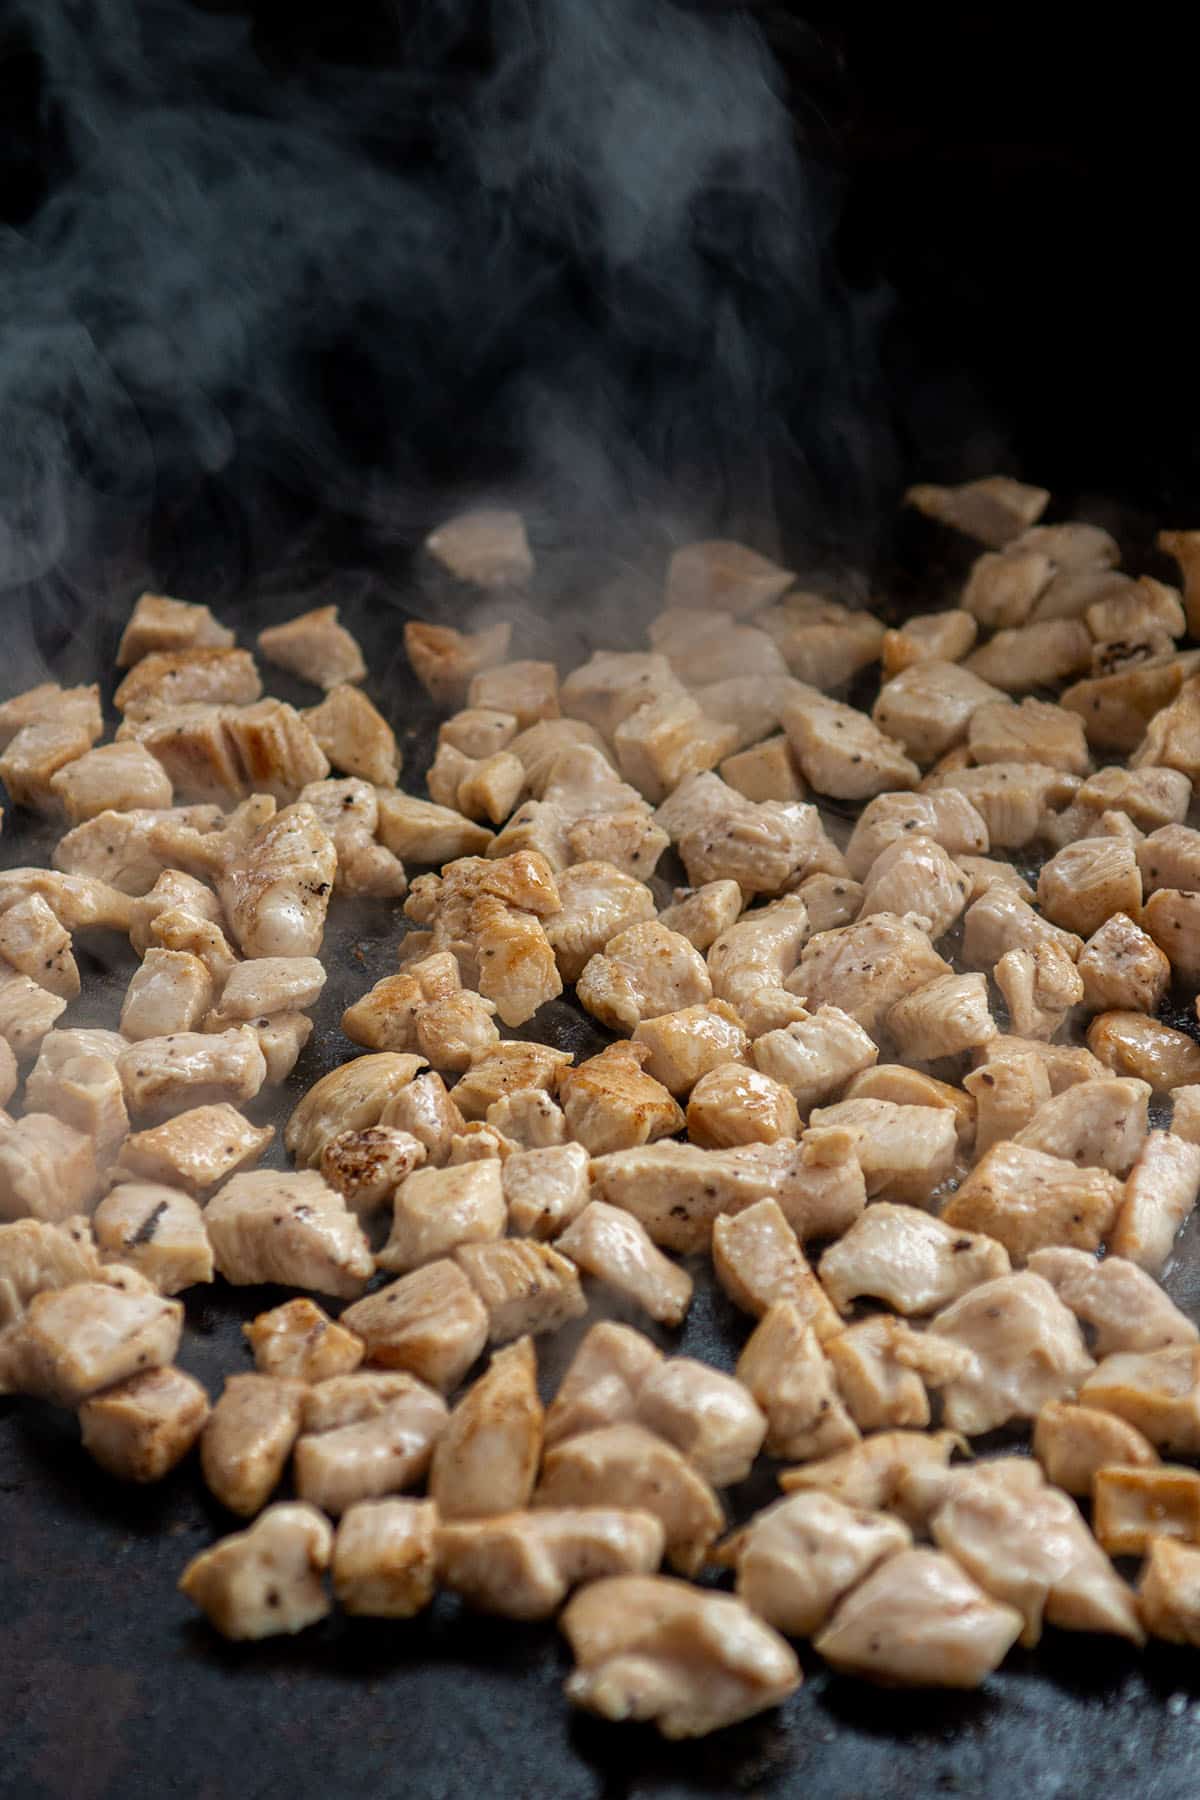 Diced chicken being browned on a Blackstone cooktop.